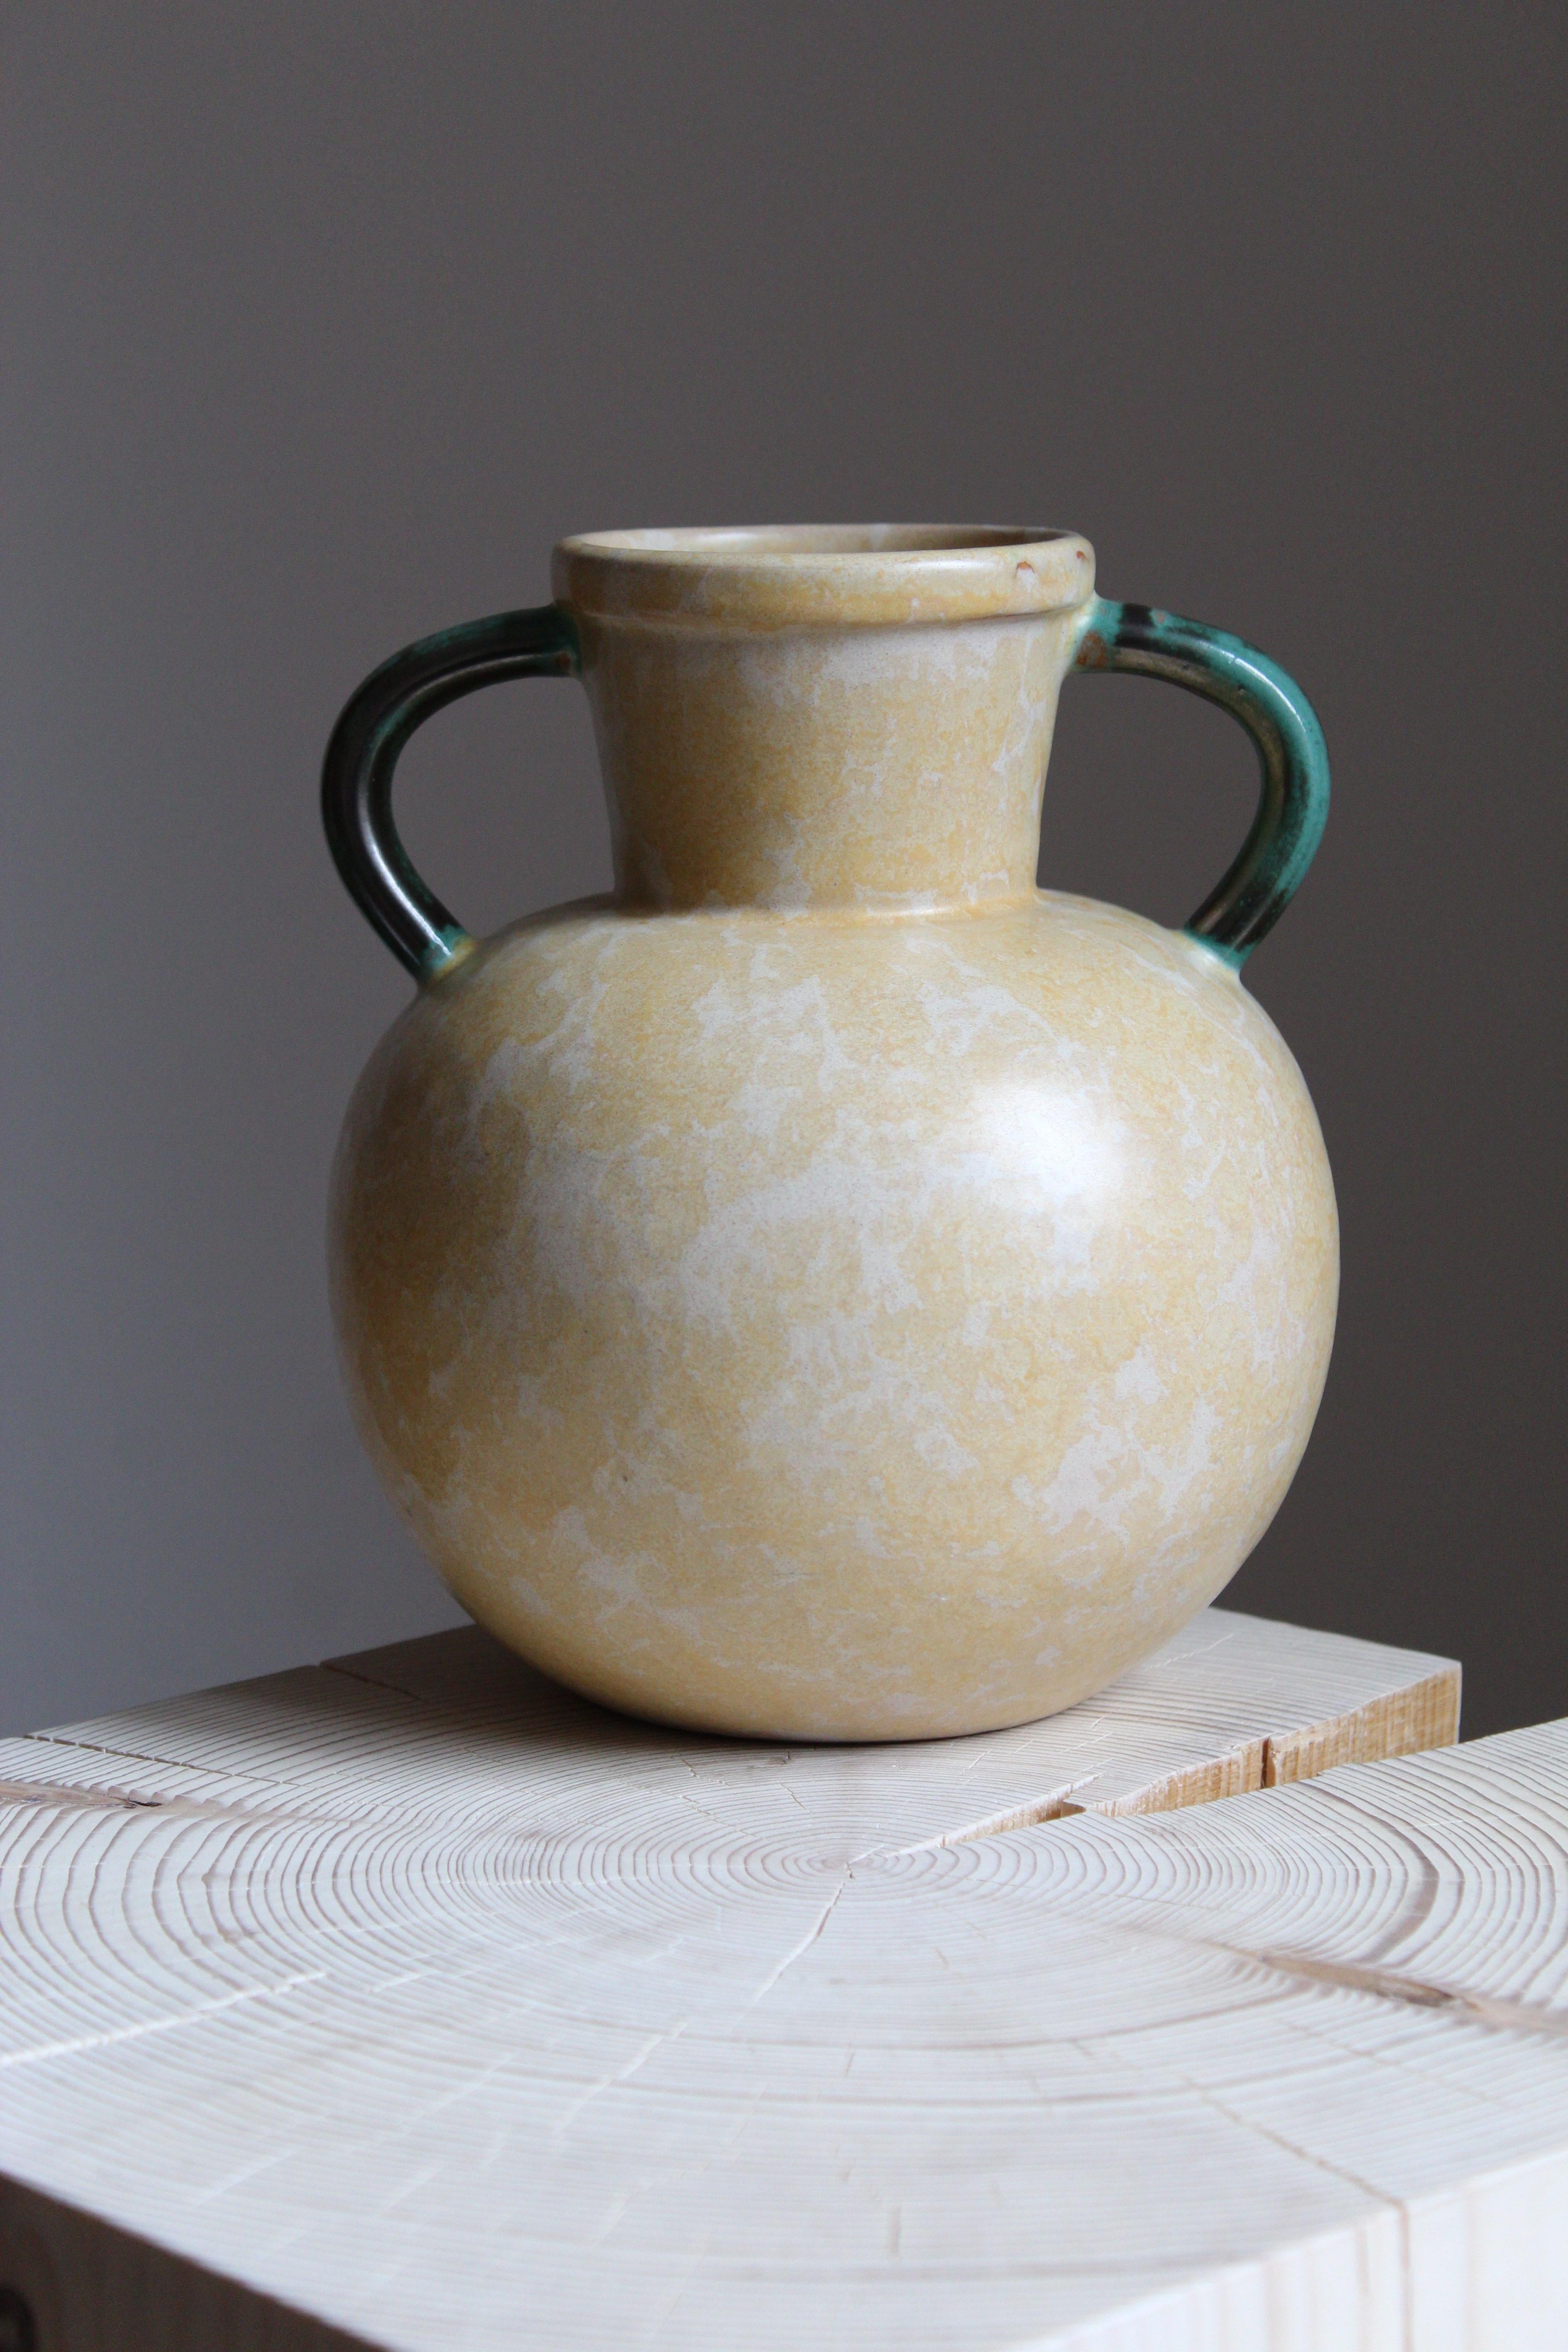 An early modernist vase. Produced by Upsala-Ekeby, Sweden, 1940s. Stoneware or earthenware. 

Other designers of the period include Ettore Sottsass, Carl Harry Stålhane, Lisa Larsson, Axel Salto, and Arne Bang.